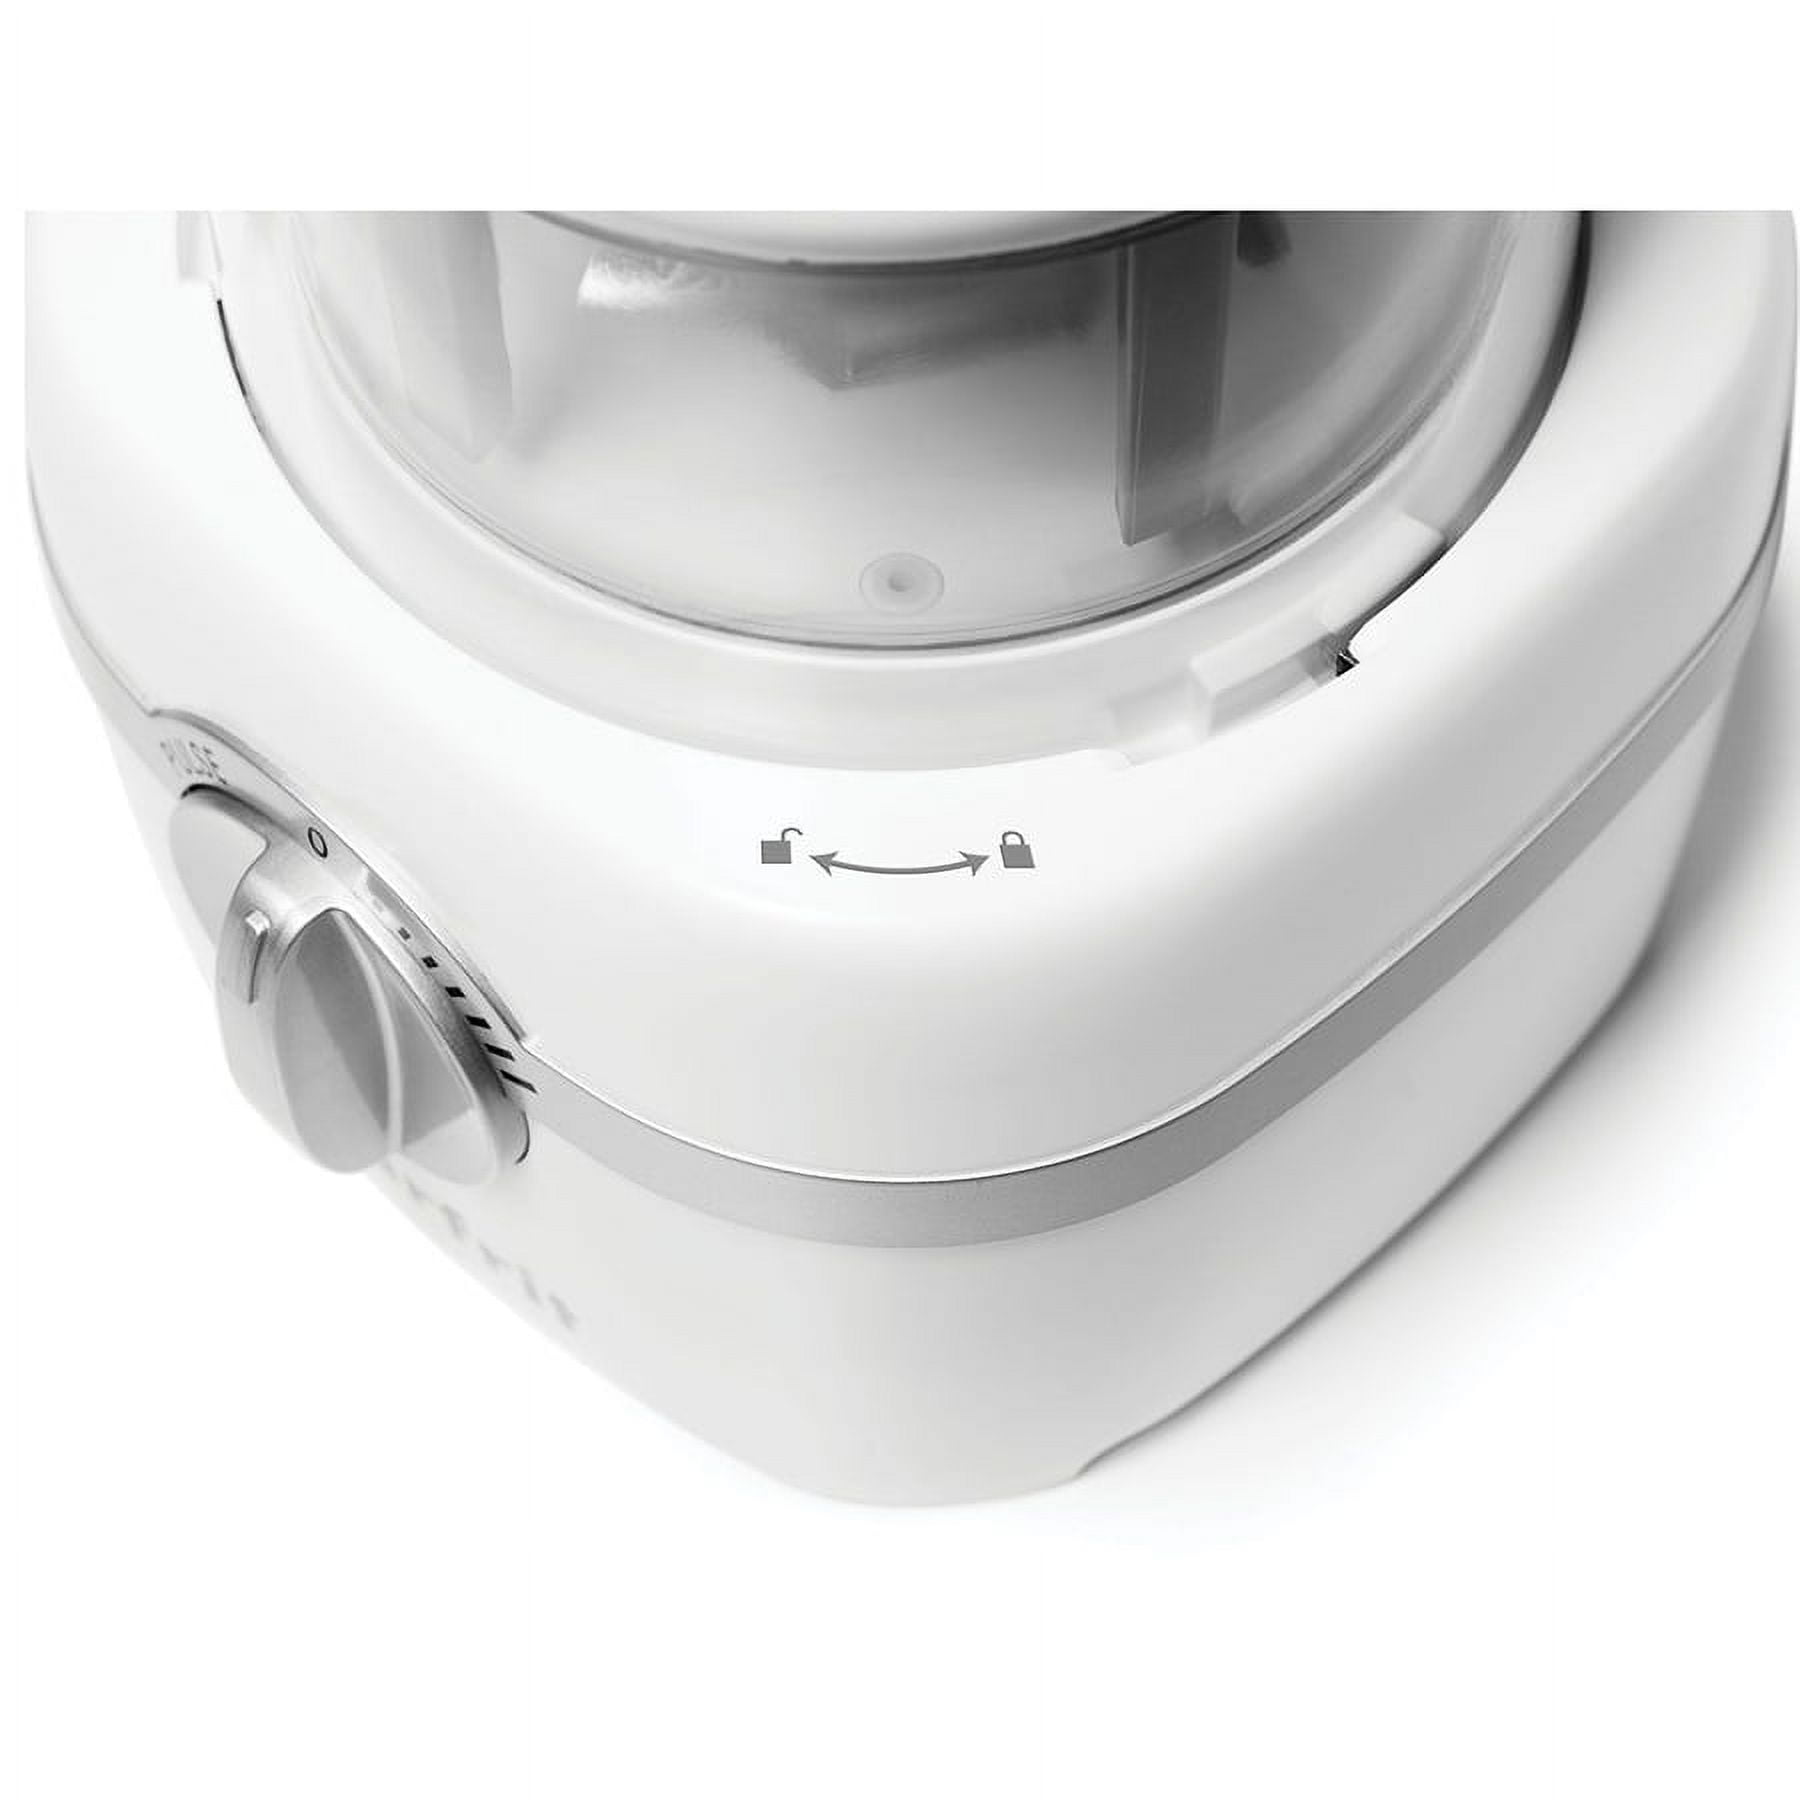 Starfrit 024227-003-0000 Electric Food Processor, 4-Cup, White